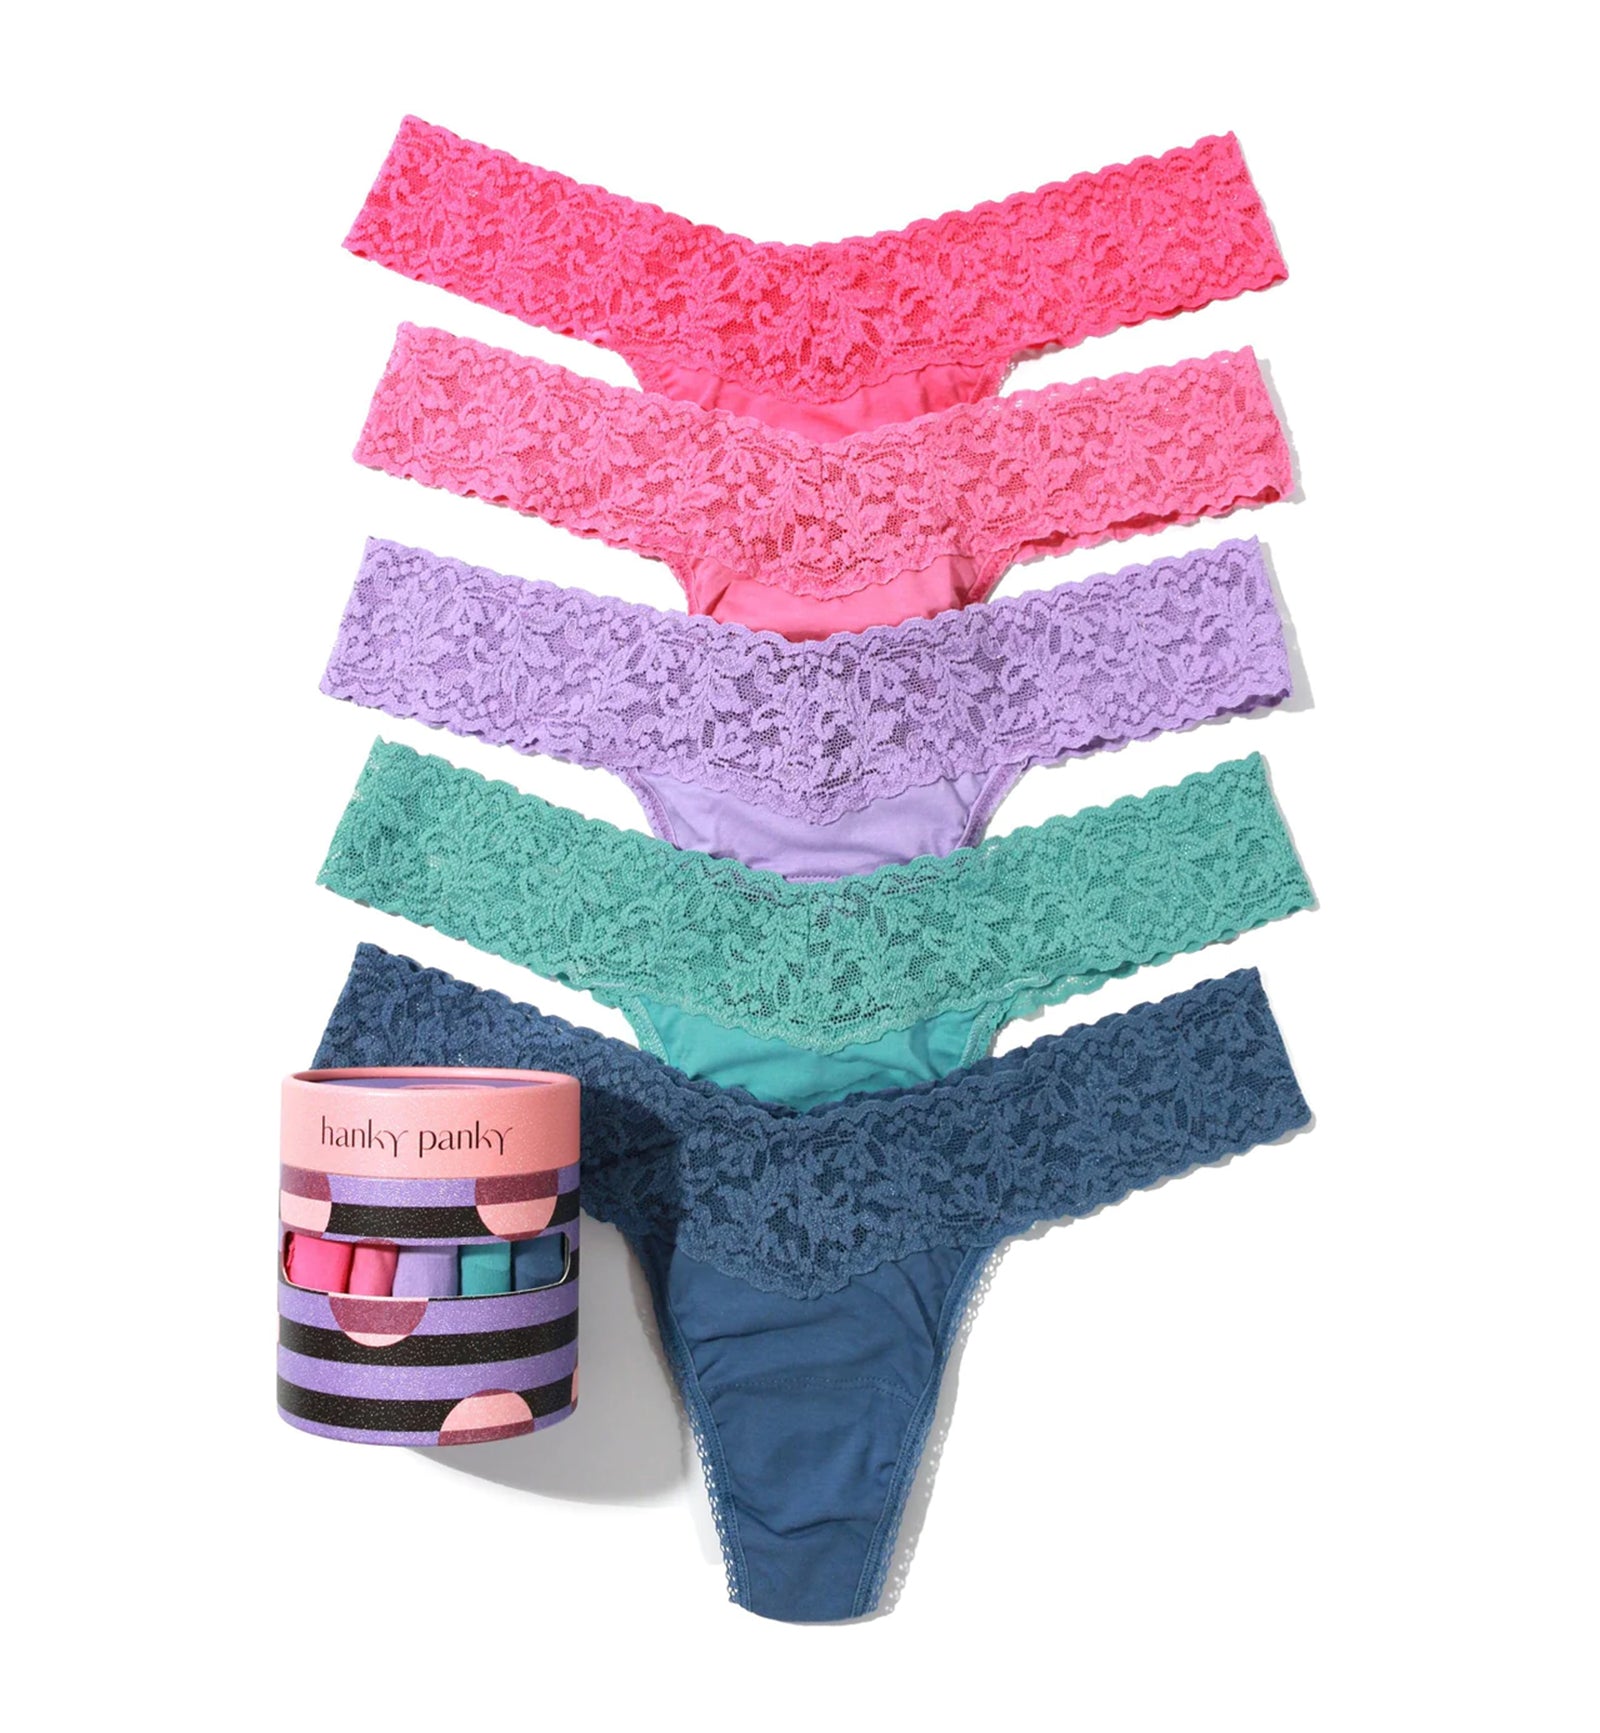 Hanky Panky 5-PACK Cotton Low Rise Thong (89155TPK),Holiday23 WCFM - WCFM,One Size